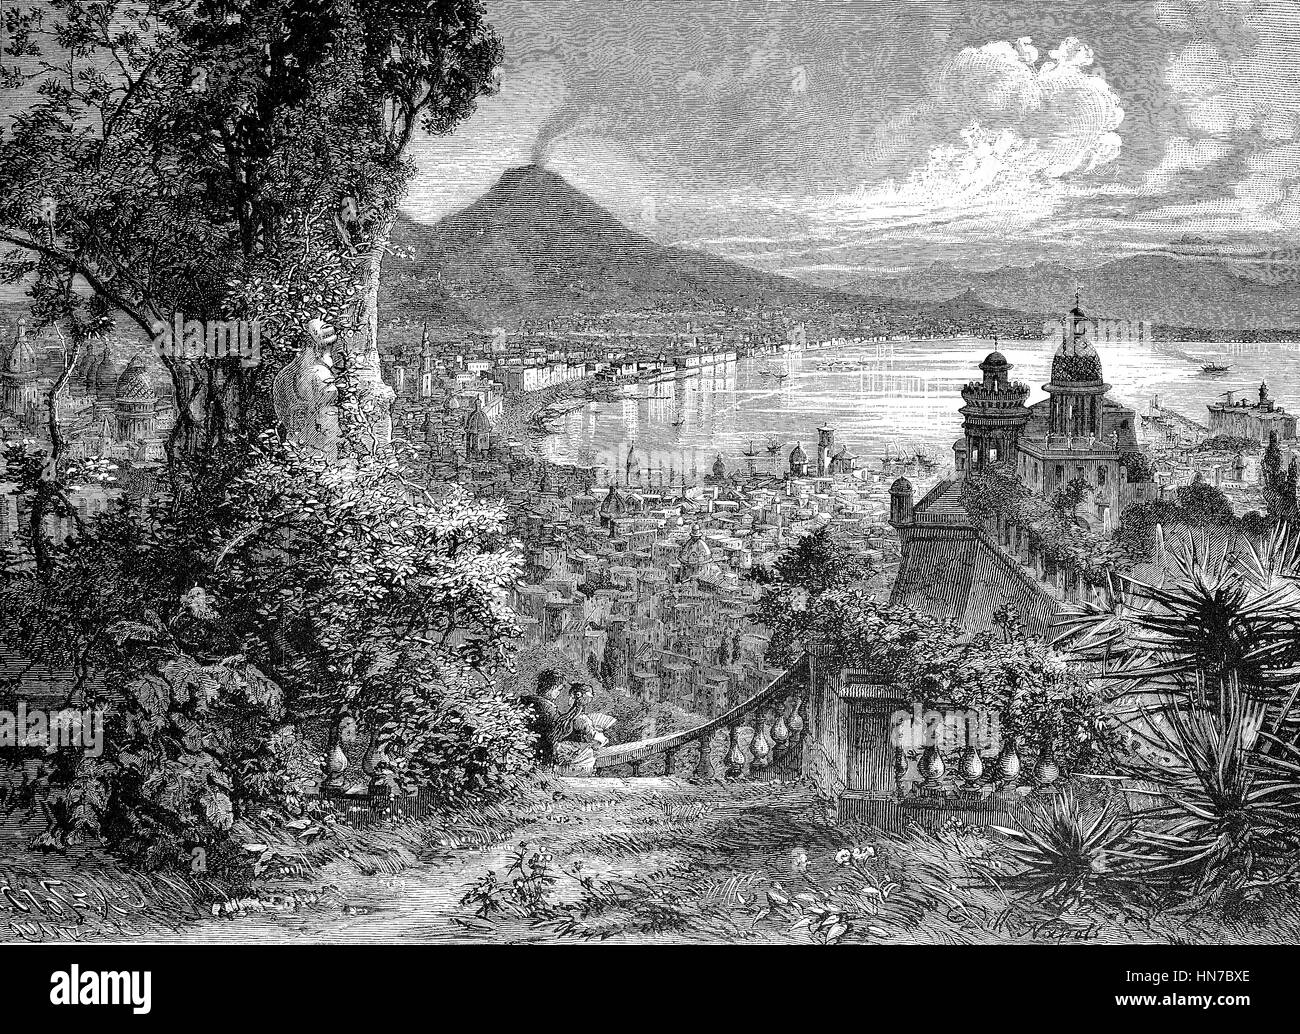 View of Naples and Mount Vesuvius from Corso Vittorio Emanuele, Italy, Blick auf Neapel und den Vesuv vom Corso Vittorio Emanuele, Italien, woodcut from 1885, digital improved Stock Photo